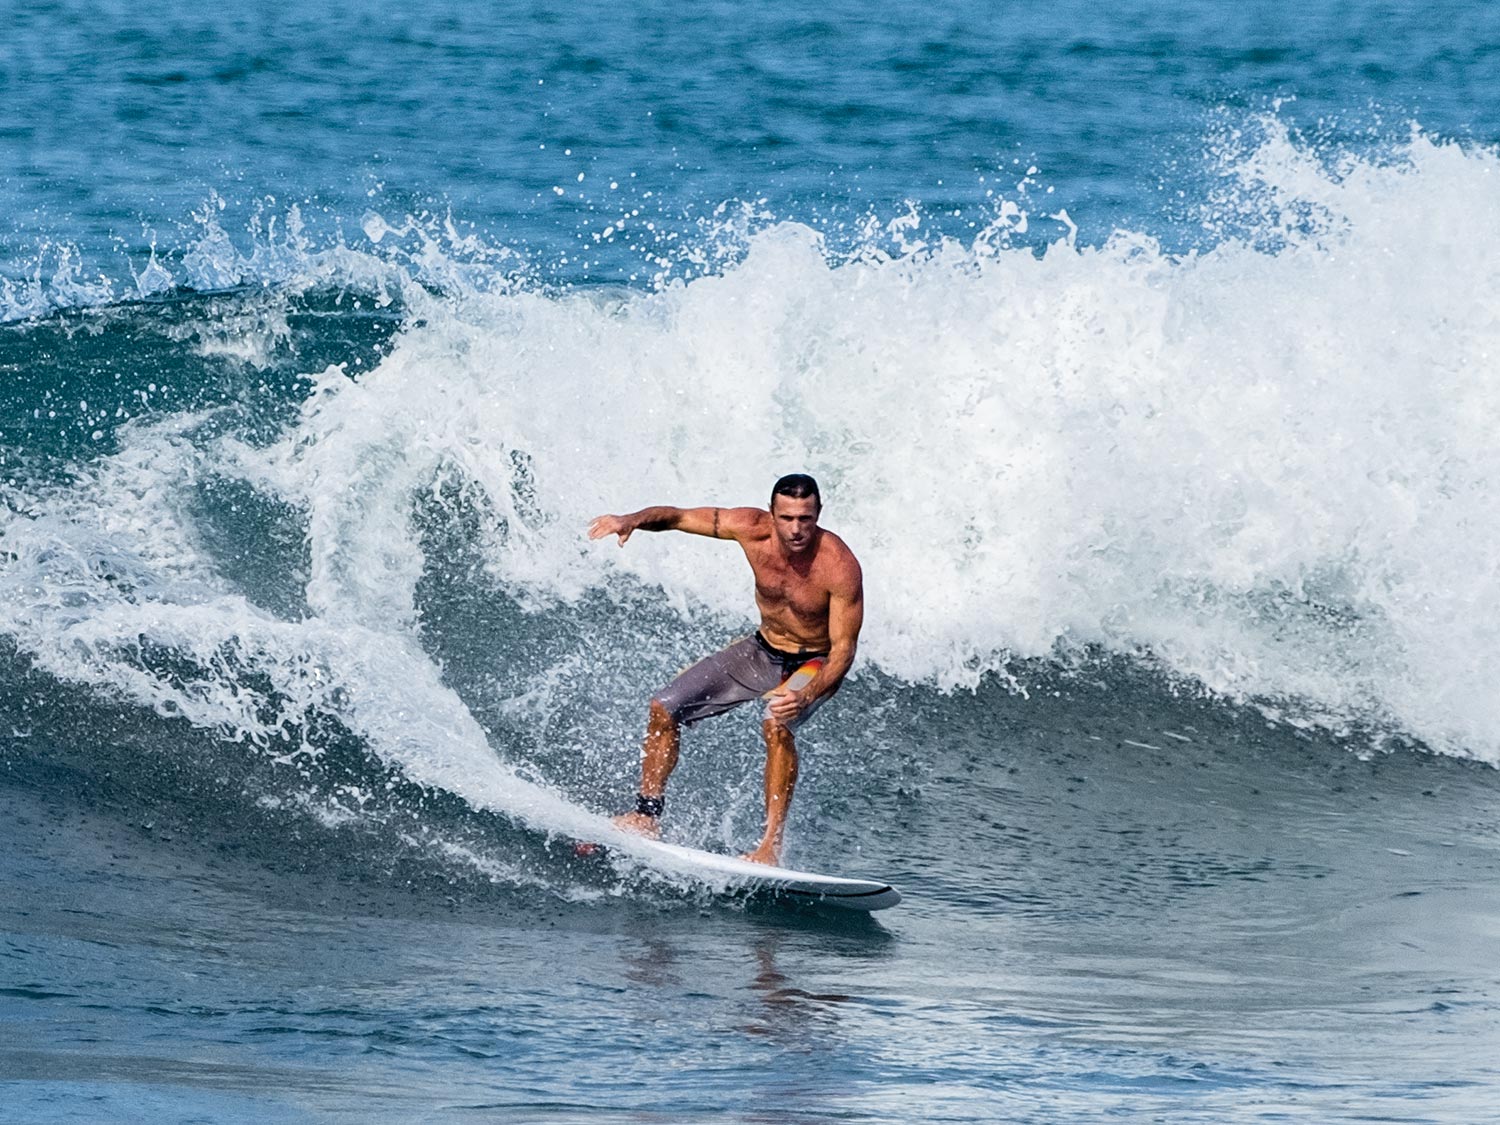 Lance Clinton rides the waves in Costa Rica.